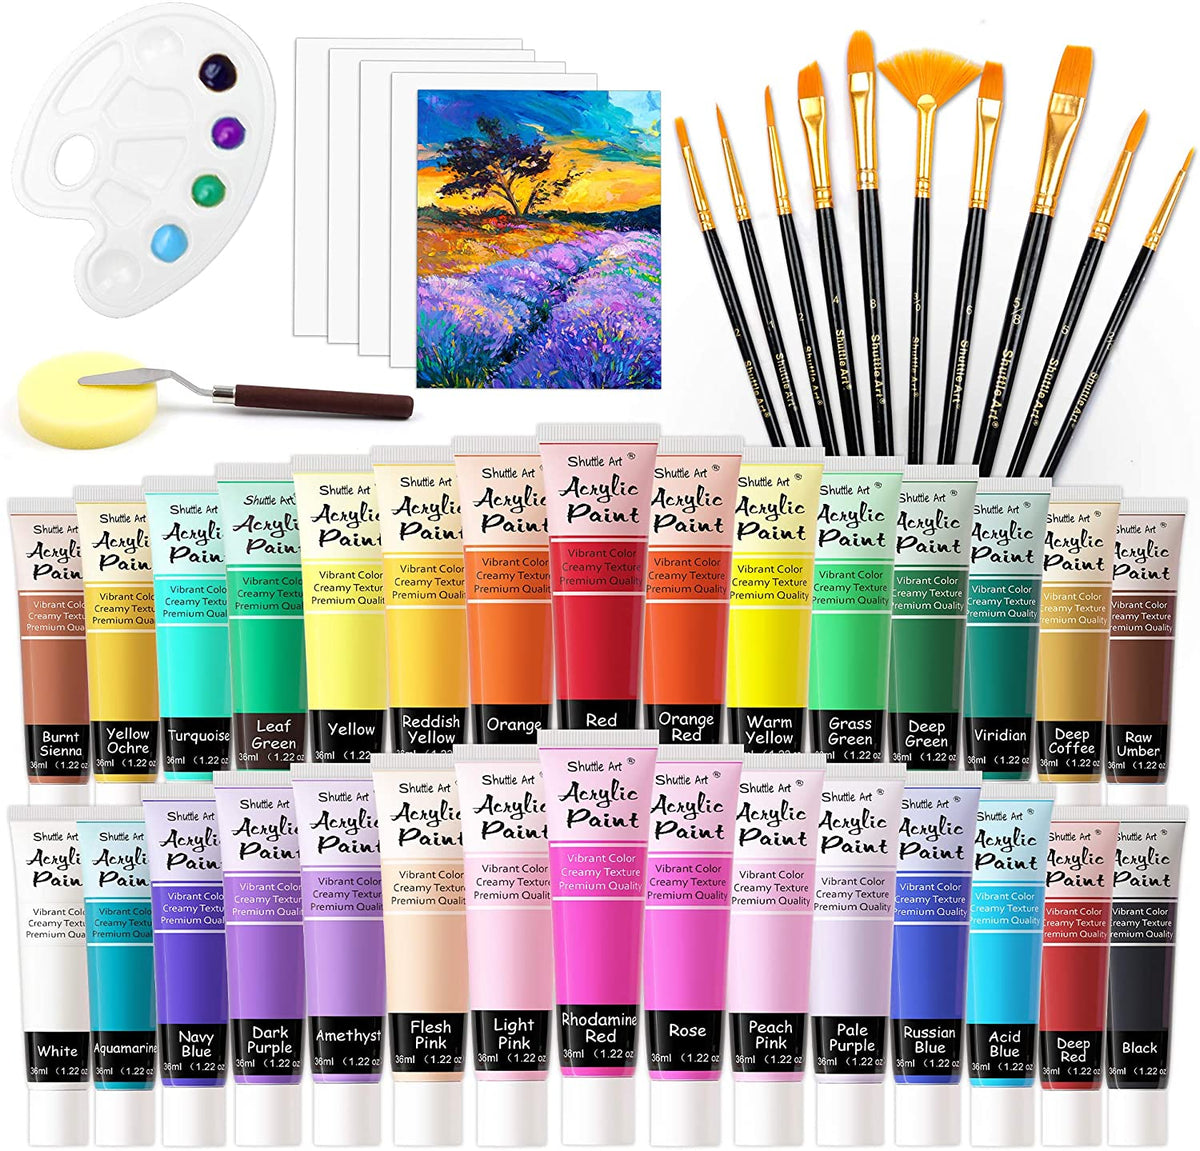 48 Pack Acrylic Paint Set Complete Paint Set for Kids, Adults Painting on  Canvas Rocks Wood Ceramic 30 Colors of Acrylic Paint 